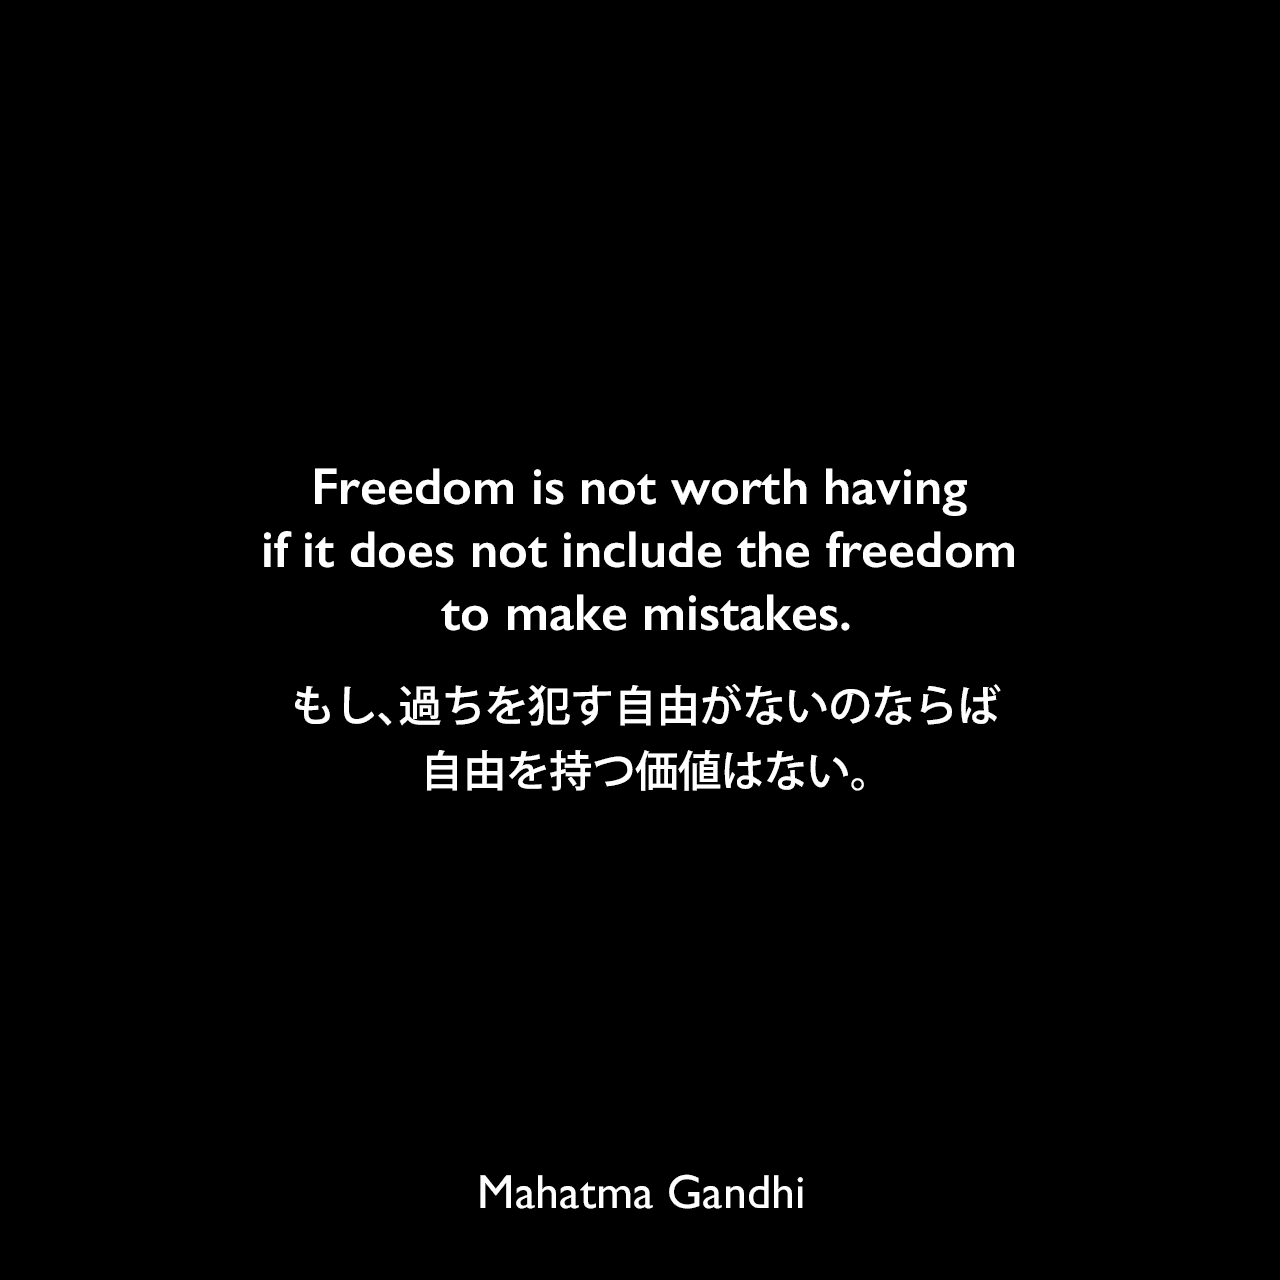 Freedom is not worth having if it does not include the freedom to make mistakes.もし、過ちを犯す自由がないのならば、自由を持つ価値はない。Mahatma Gandhi